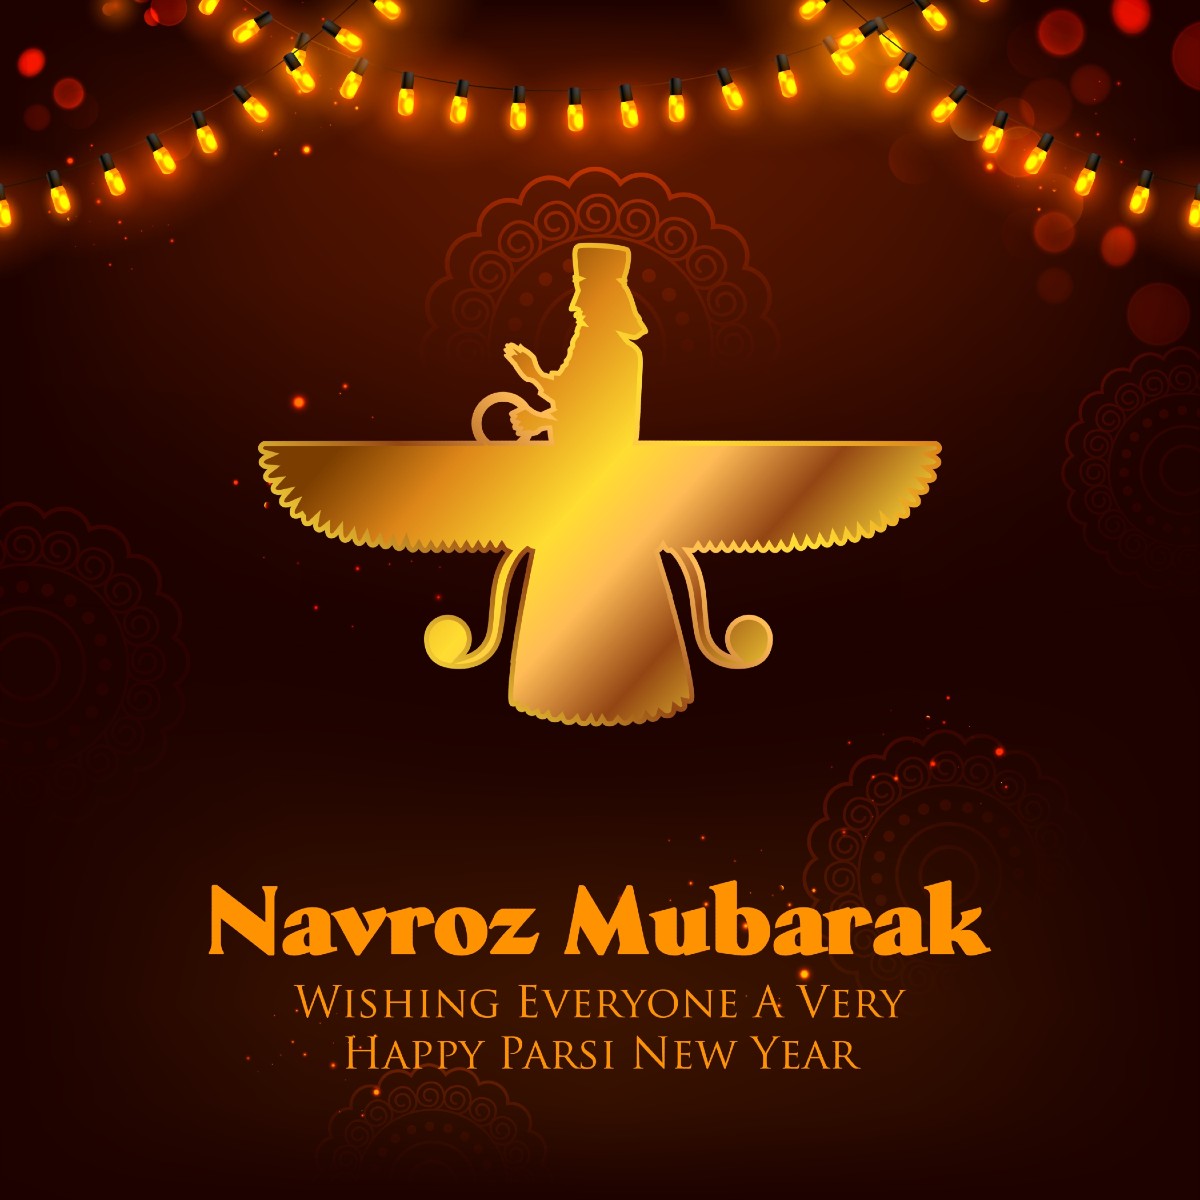 Parsi New Year 2021 Images, Wishes, Quotes and Messages to Send to